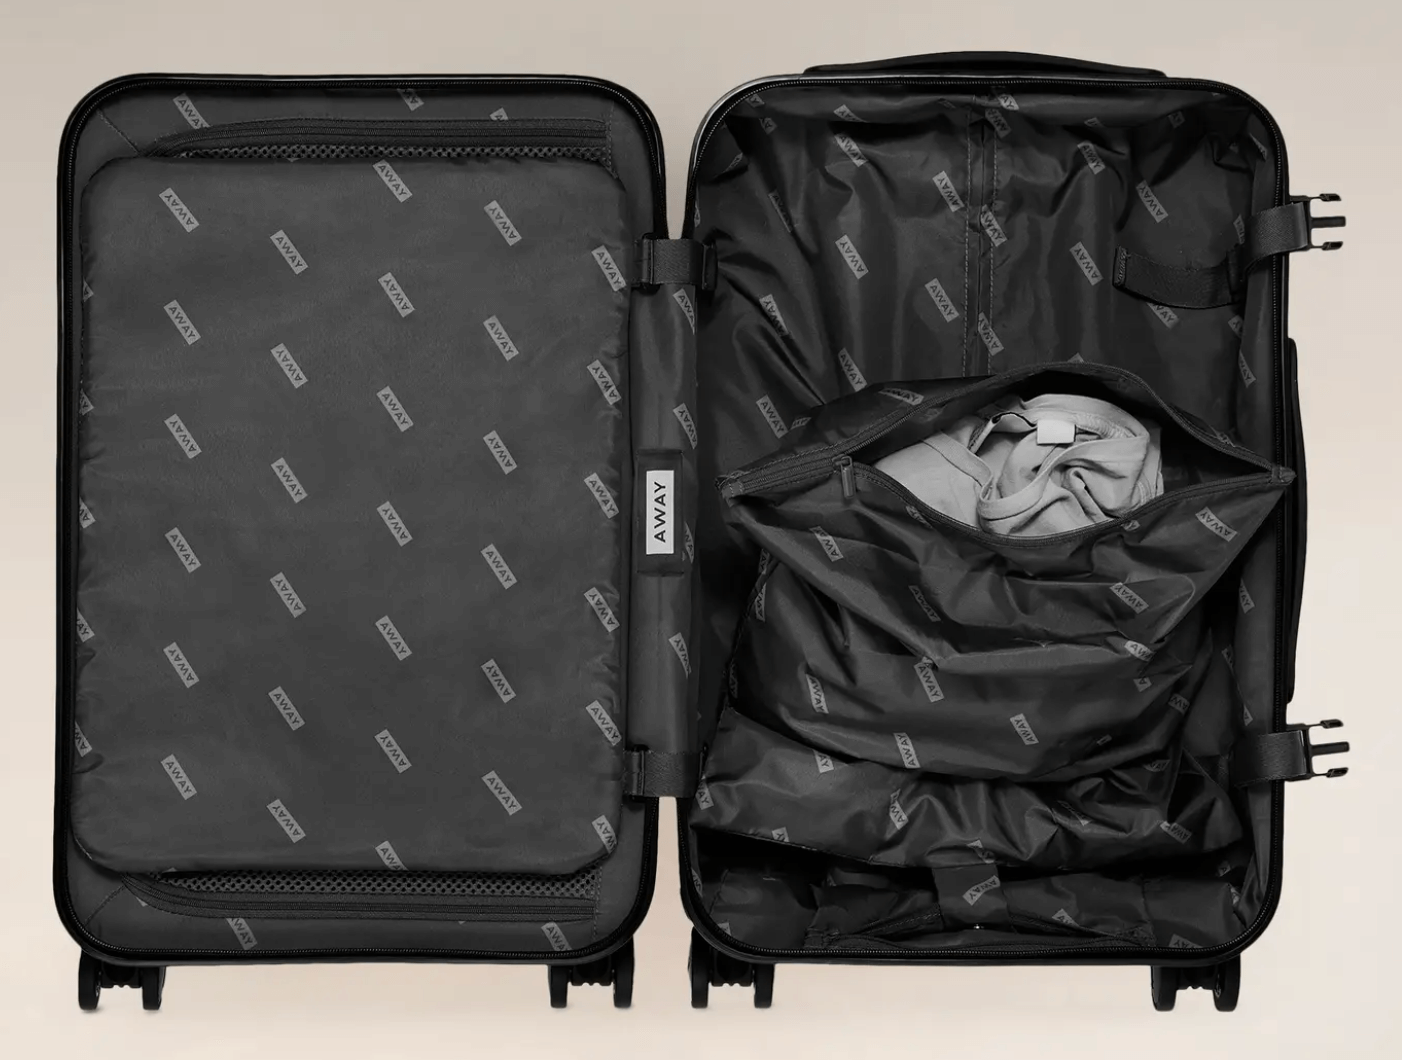 away bigger carry on open suitcase black interior with away logo design black away logo laundry bag with grey clothing inside black wheels on bottom of suitcase